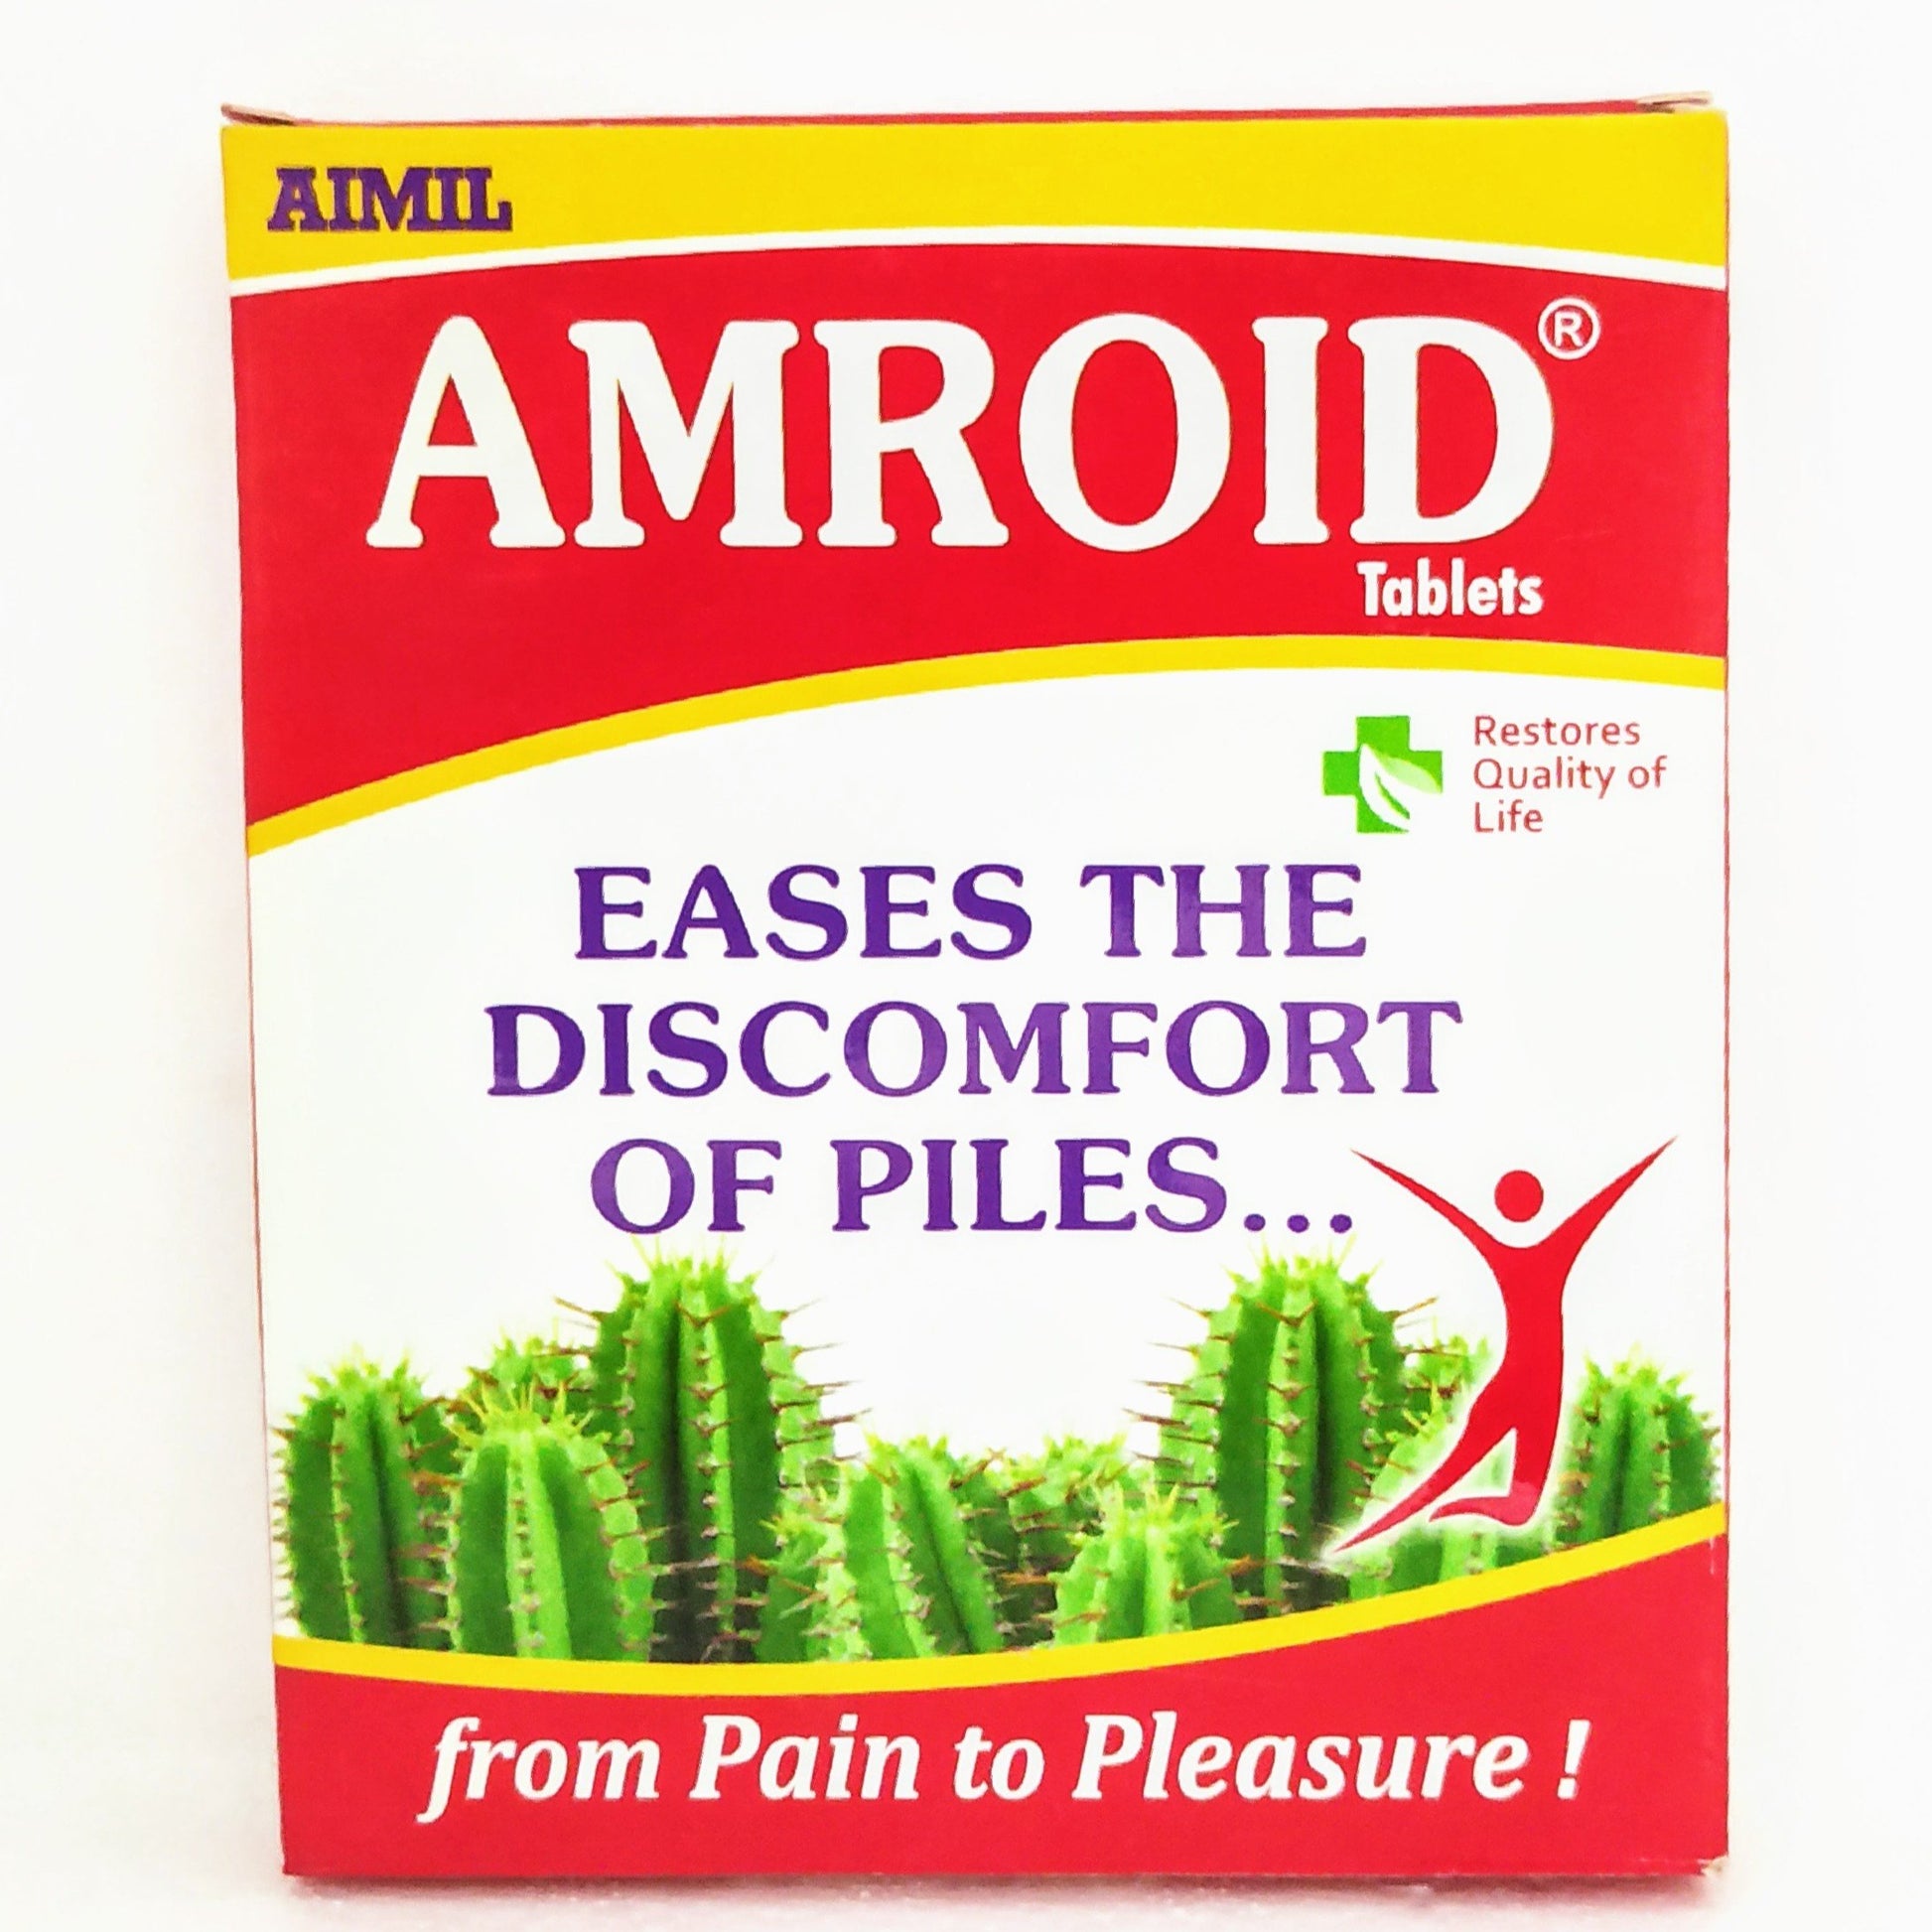 Shop Aimil Amroid 30 tablets at price 195.00 from Aimil Online - Ayush Care